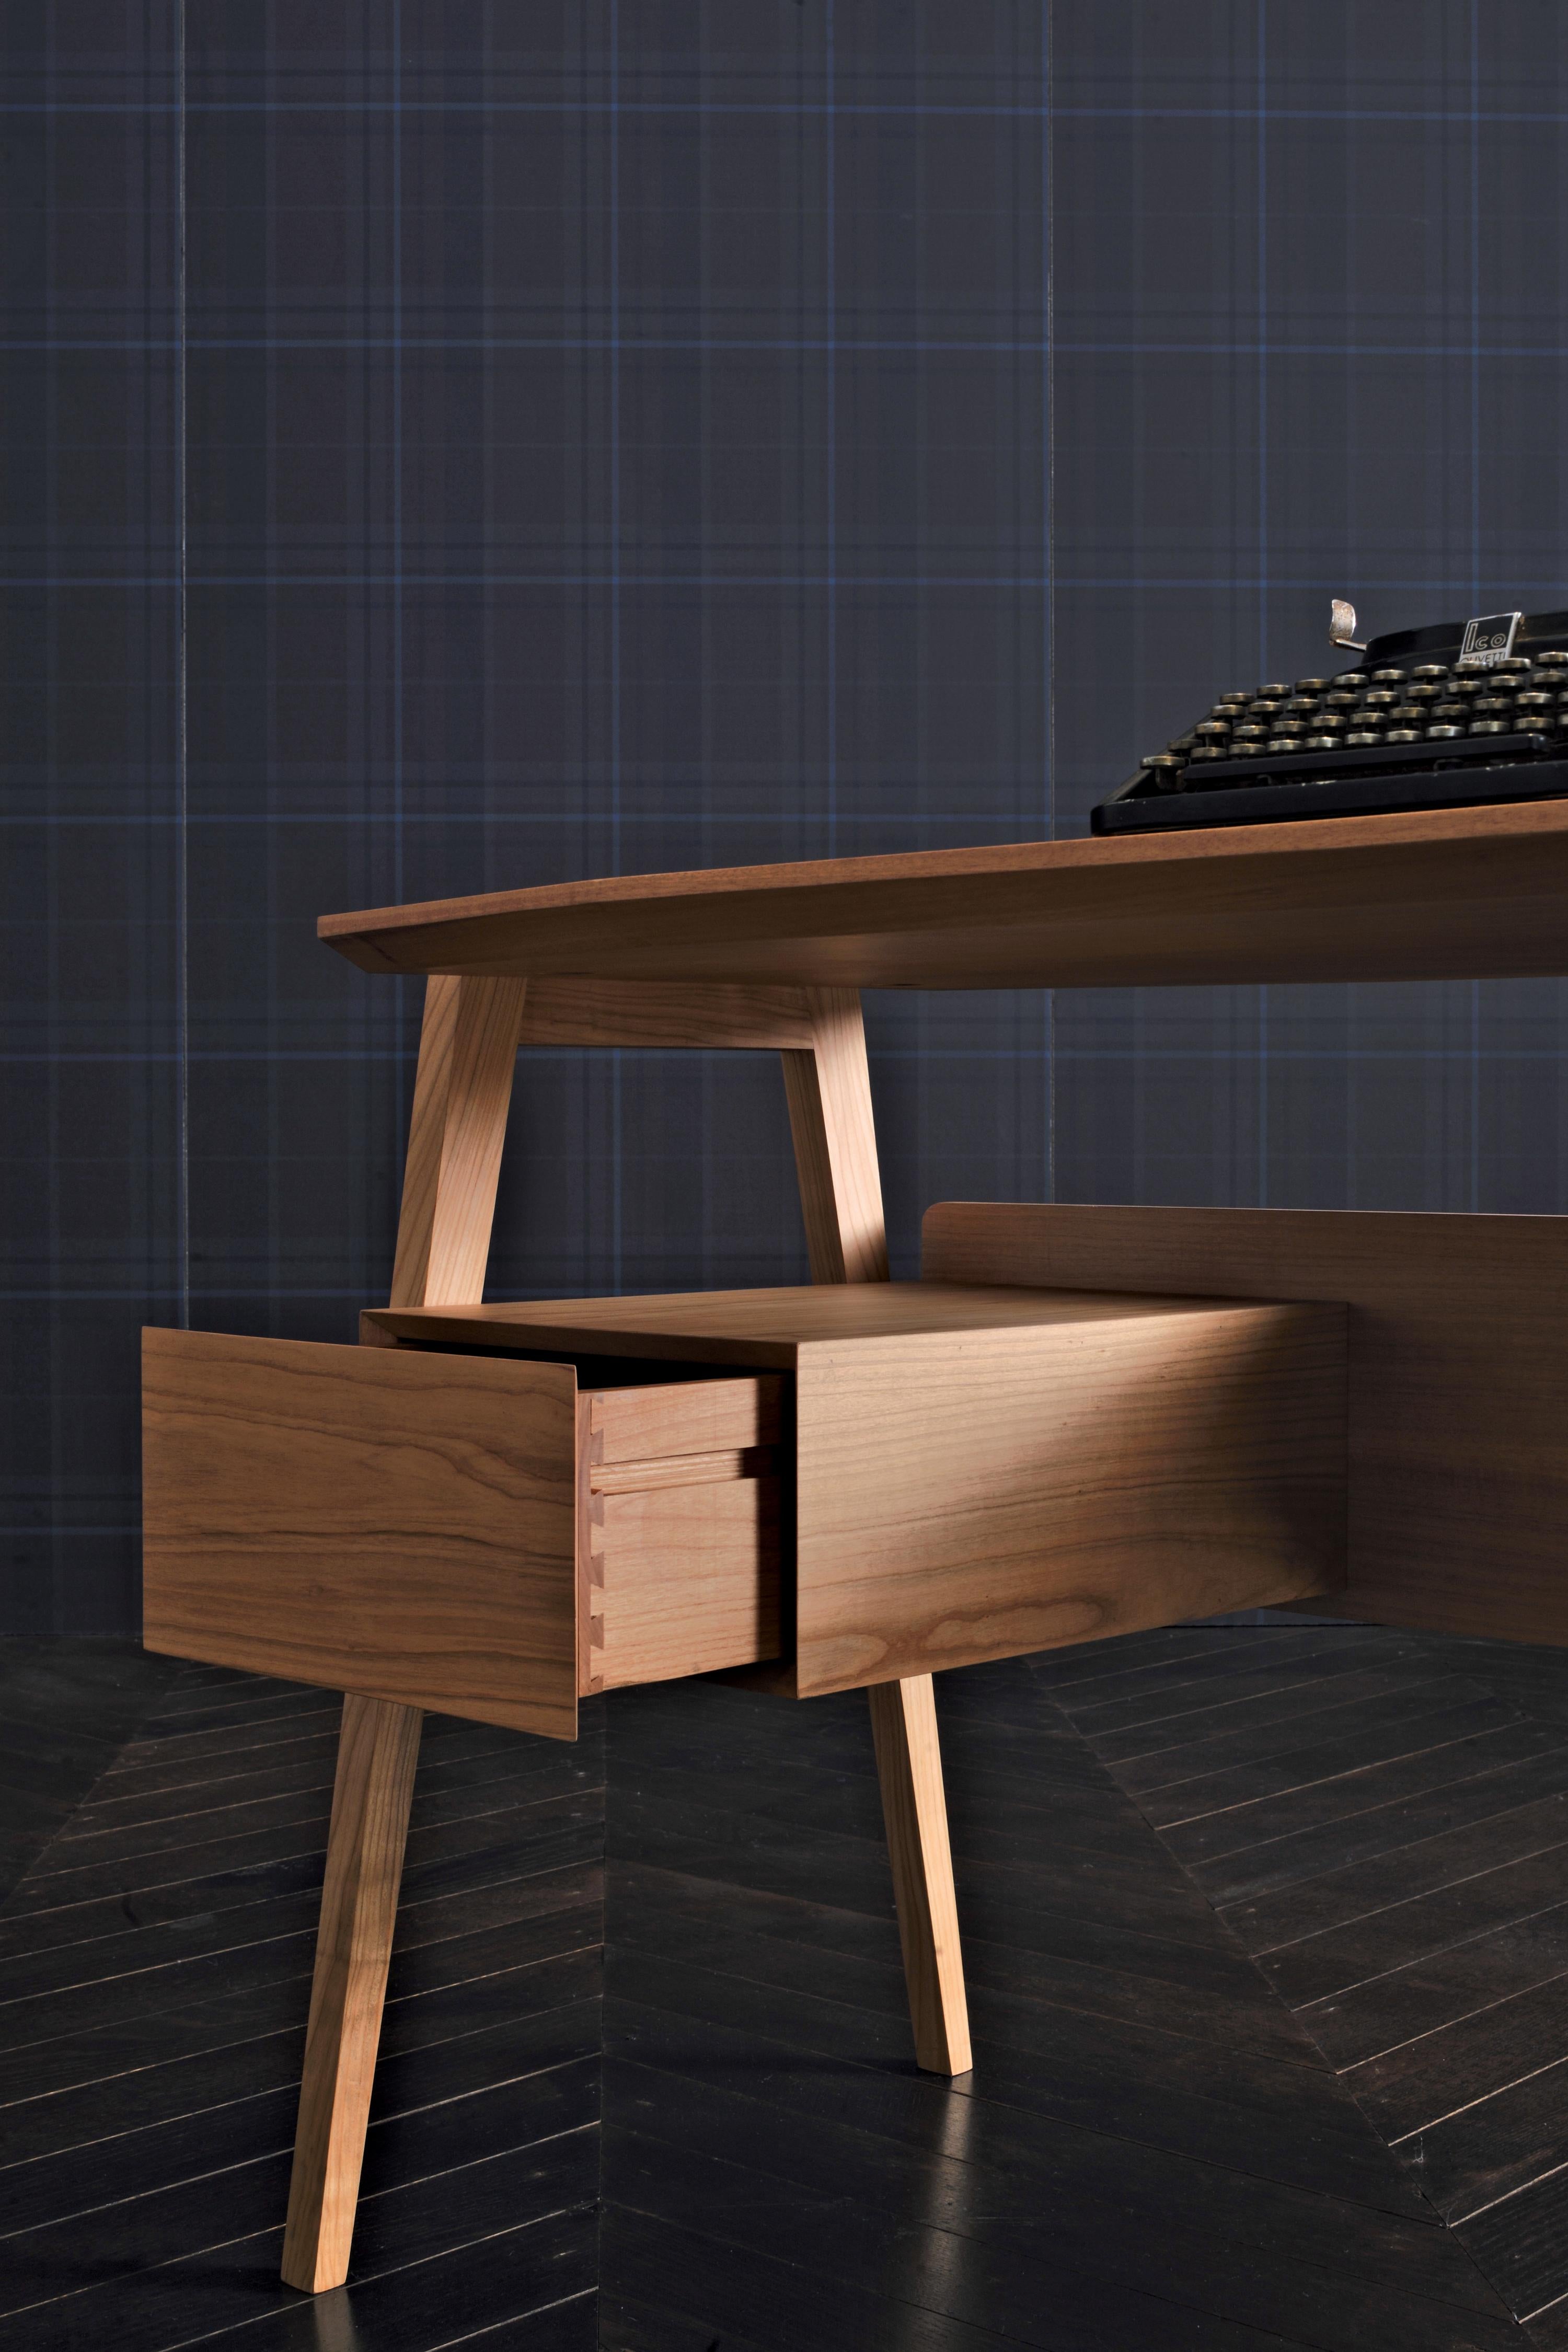 Midcentury Style Wooden Writing Desk with Drawers, by Morelato 1